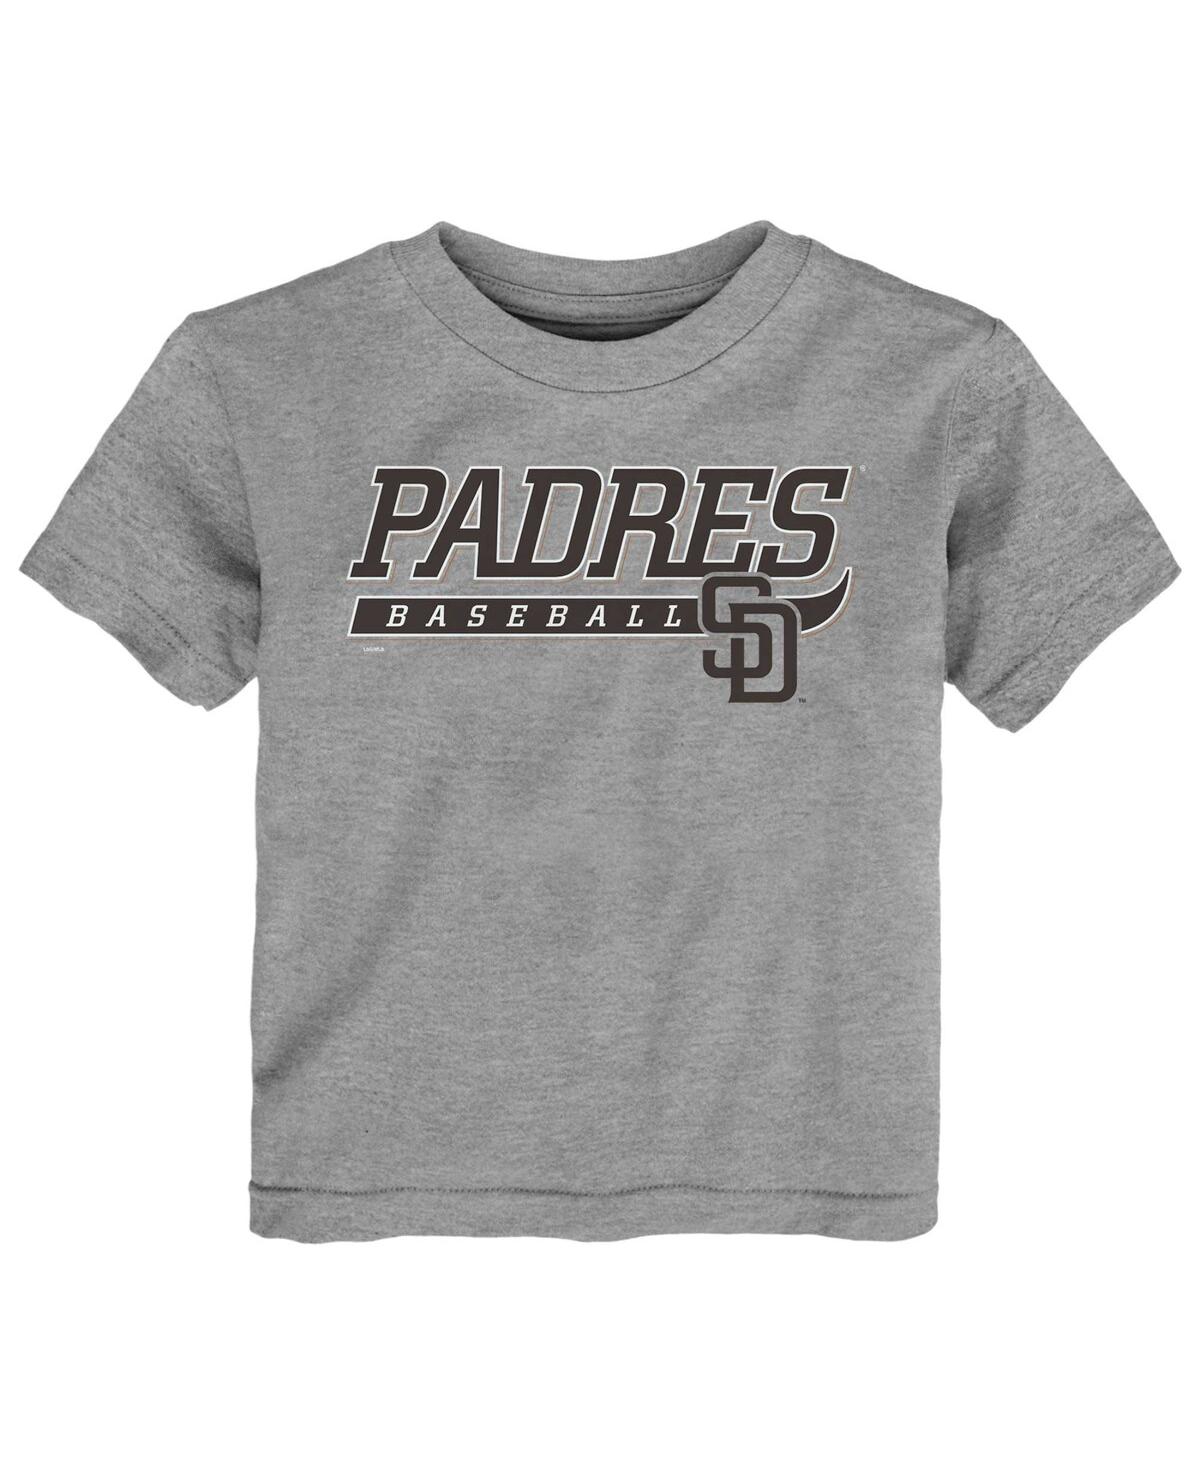 OUTERSTUFF TODDLER BOYS AND GIRLS HEATHER GRAY SAN DIEGO PADRES TAKE THE LEAD T-SHIRT